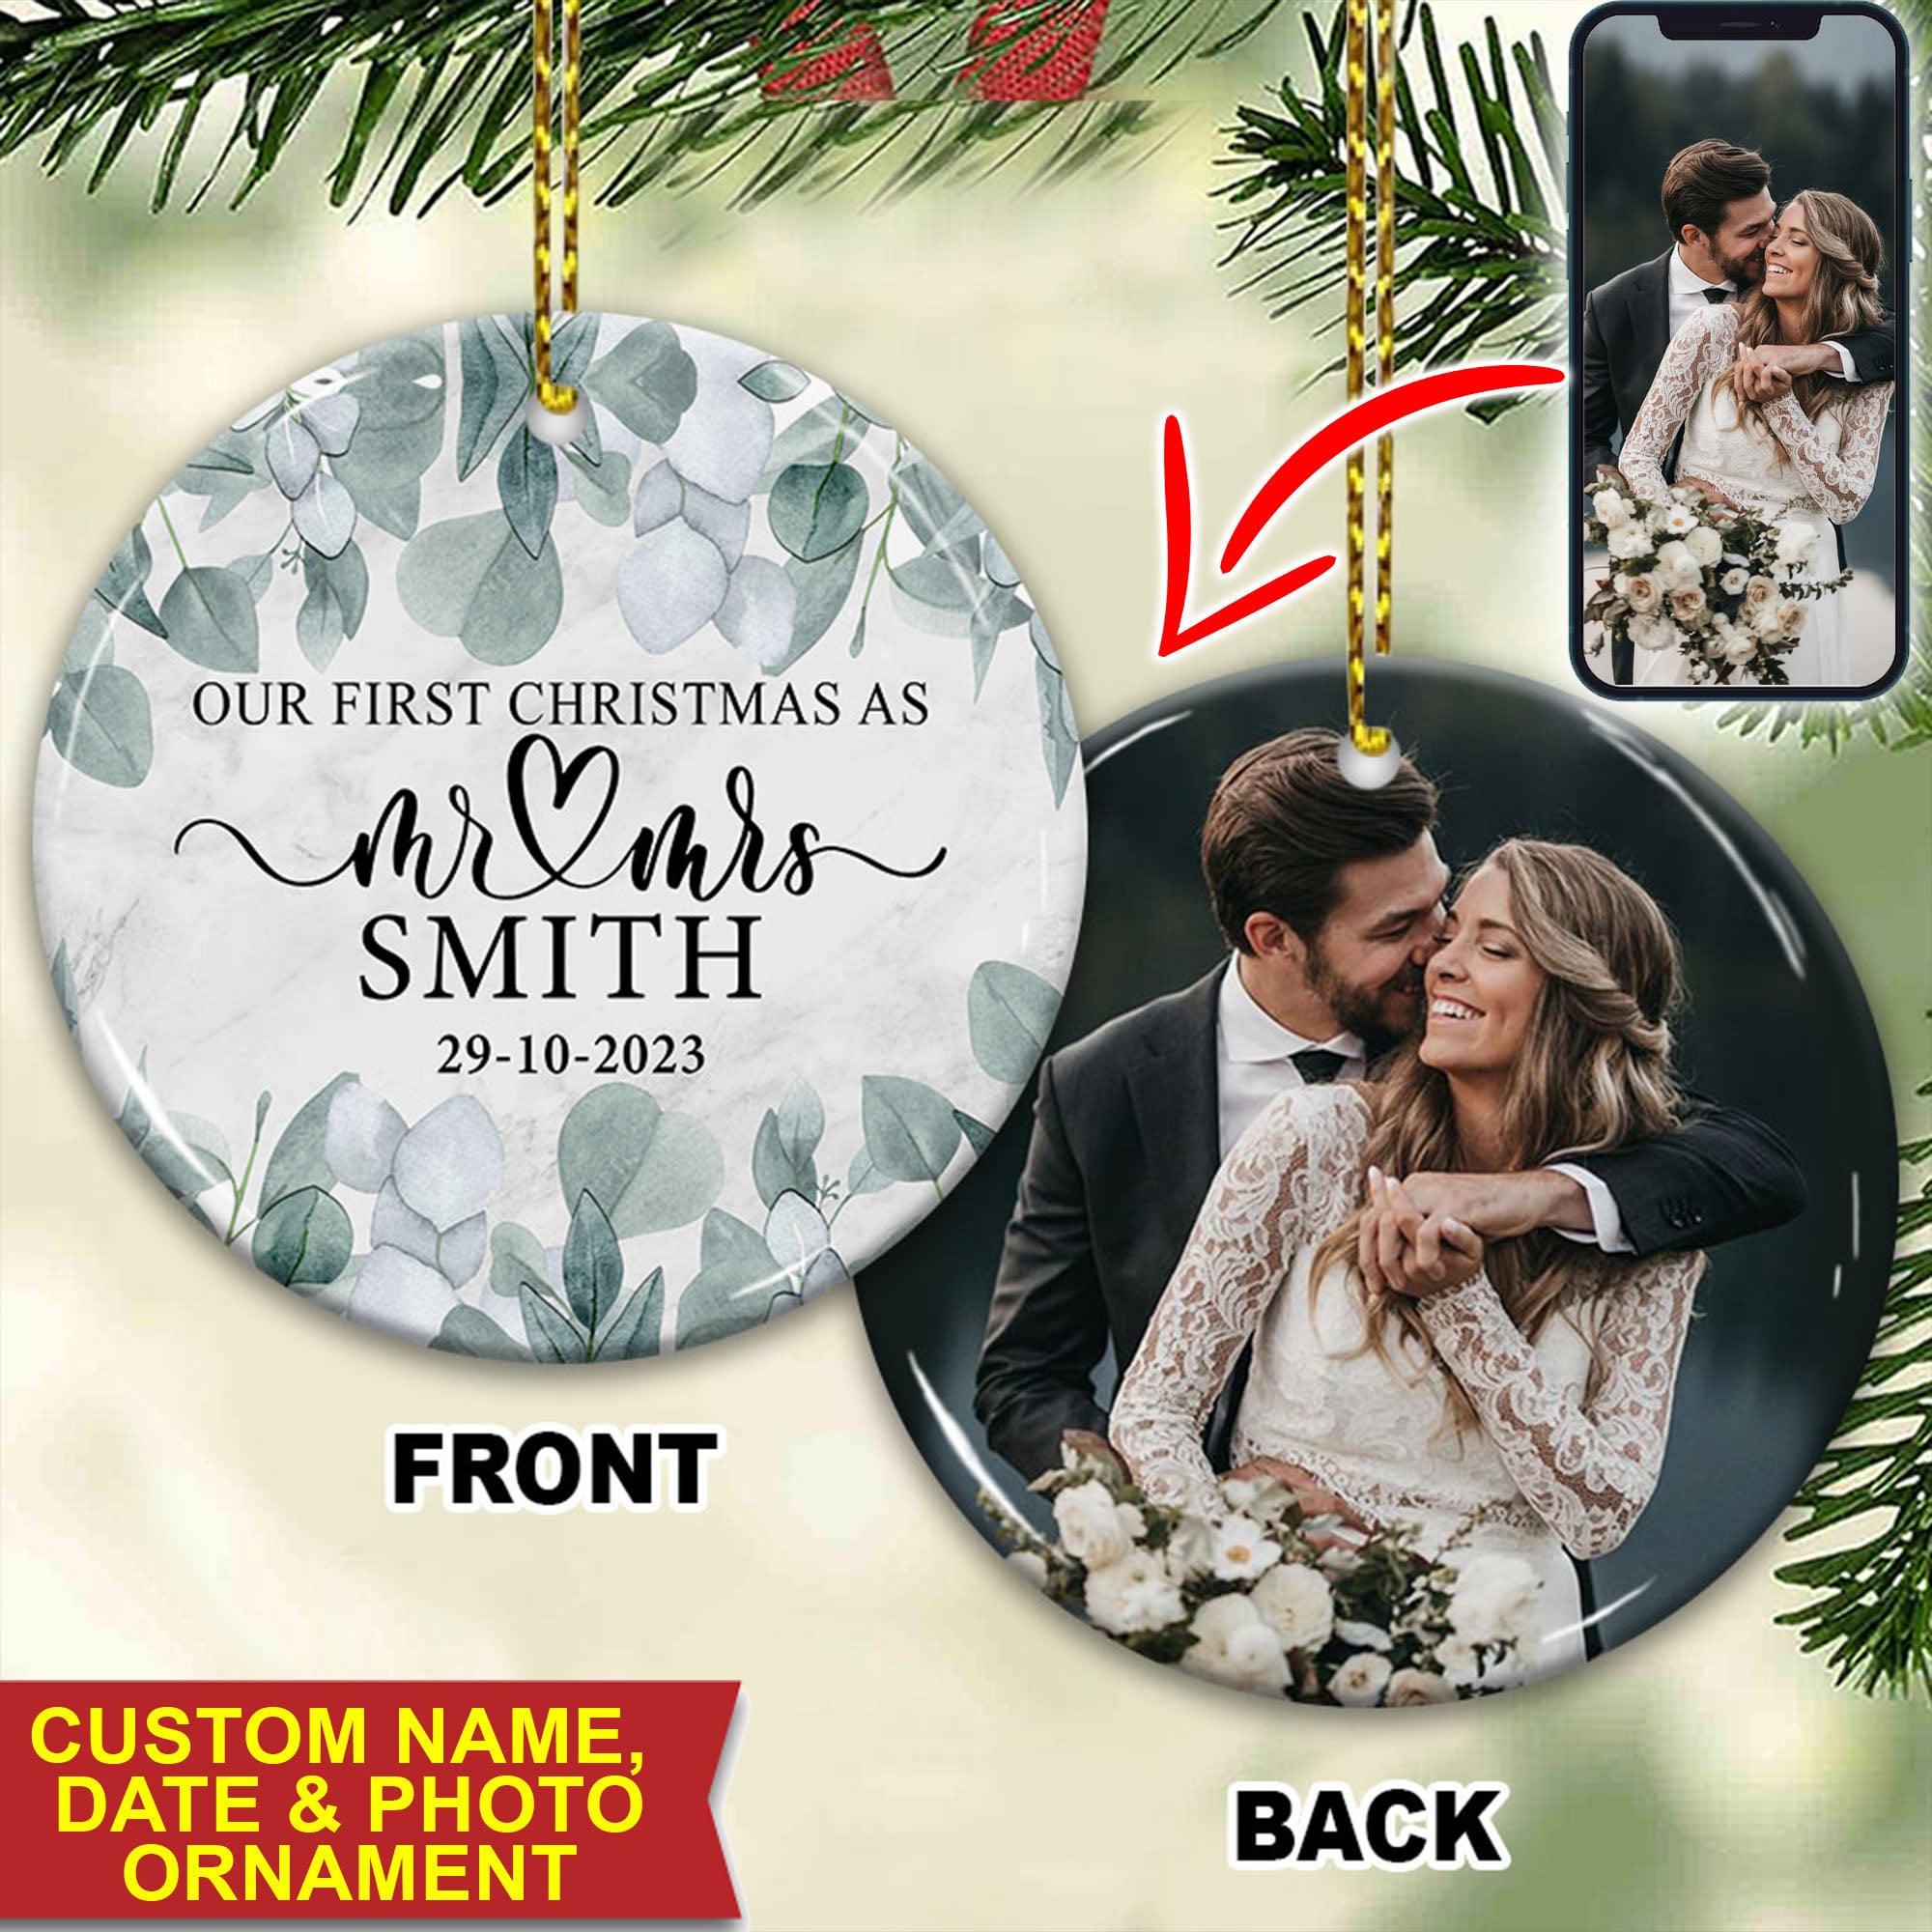 Our First Christmas As Mr & Mrs - Personalized 2 Sides Ceramic Ornament - Gift For Couple, Custom Photo Gift For Christmas